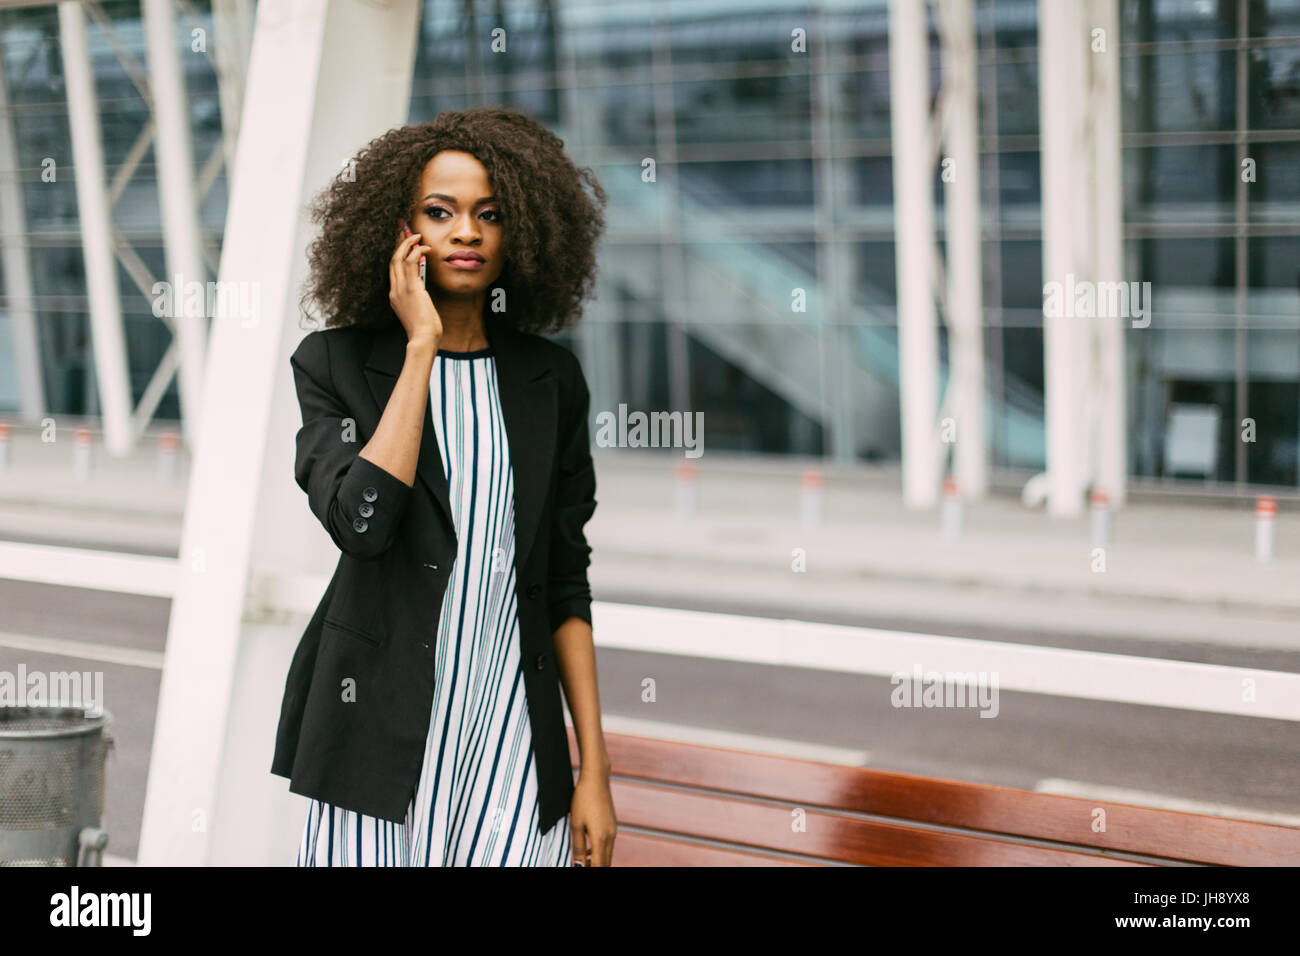 Close-up horizontal portrait of the beautiful serious afro-american girl talking via the mobile phone. Stock Photo